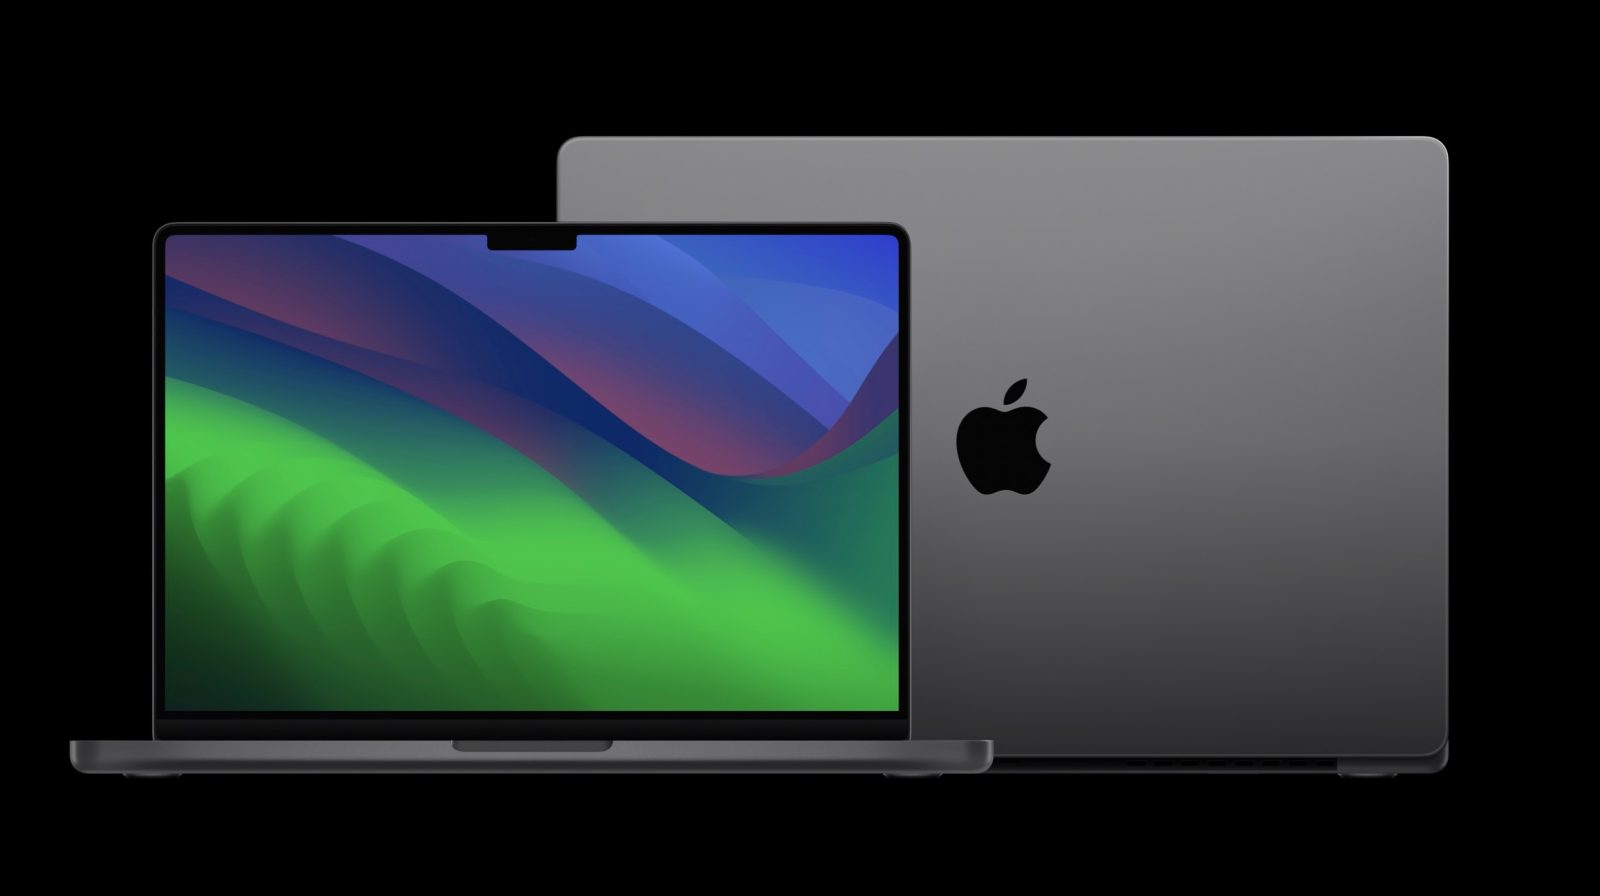 Apple announces new iMac and MacBook Pro powered by M3 chips